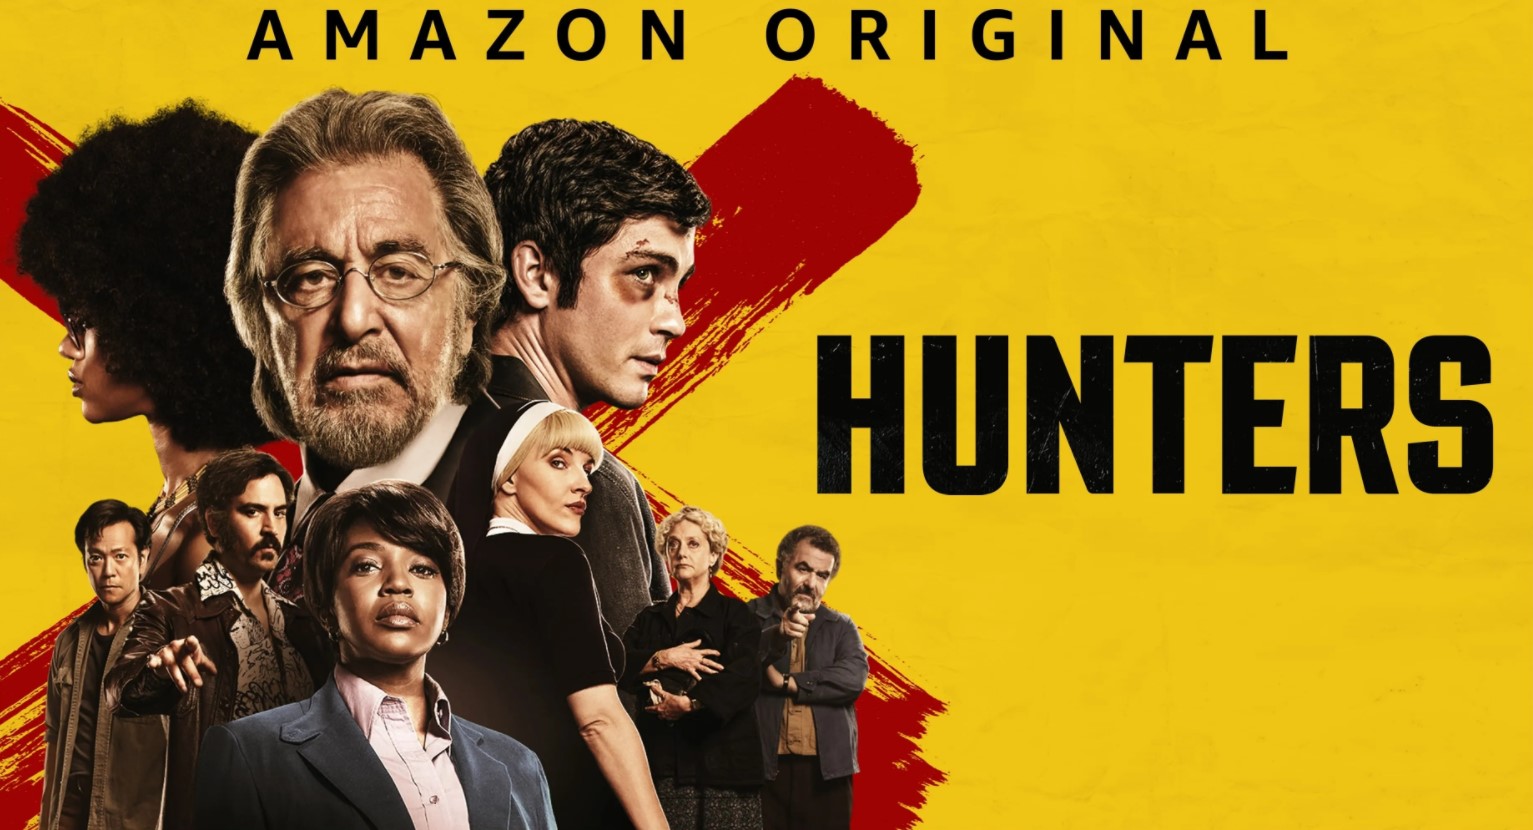 Hunters Season 2: Release Date, Trailer, and more! - DroidJournal